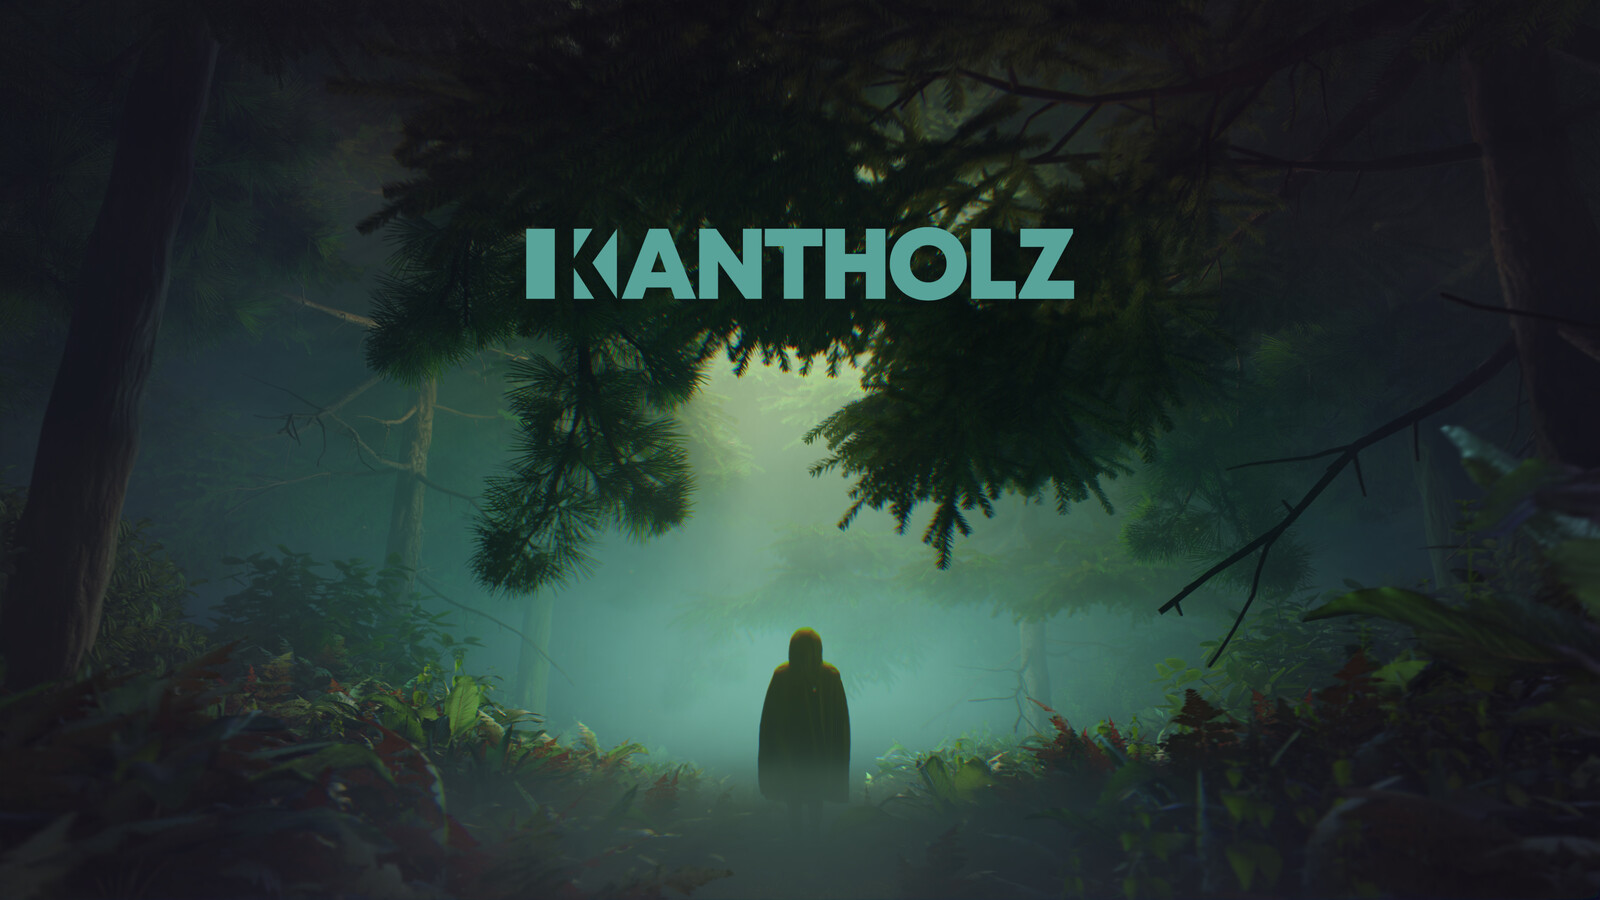 music video for "schattenseite" by Kantholz